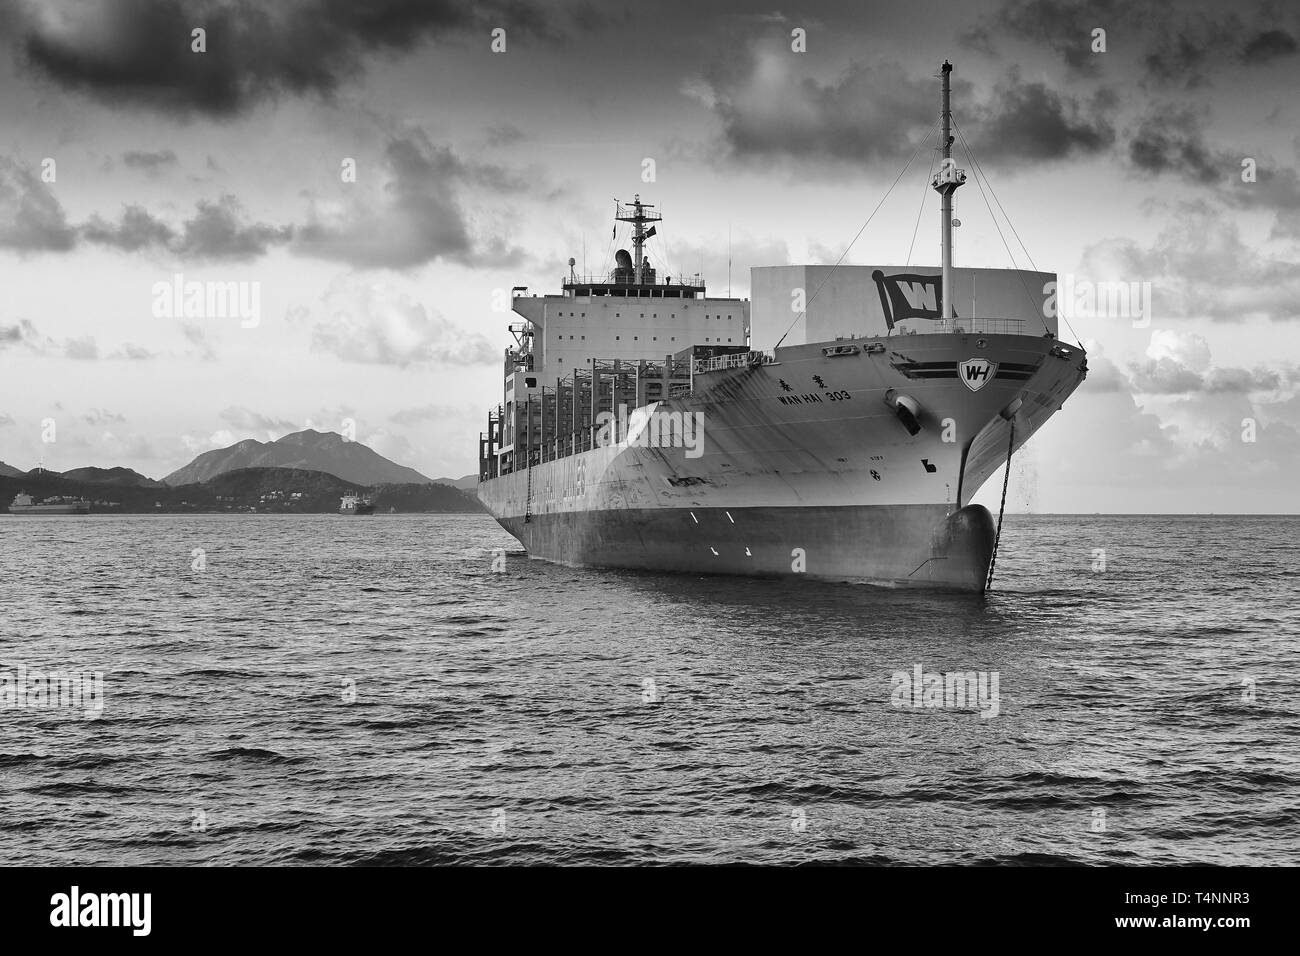 Black And White Photo Of The WAN HAI LINES Container Ship, WAN HAI 303, Anchored Off Green Island, Victoria Harbour, Hong Kong. Stock Photo